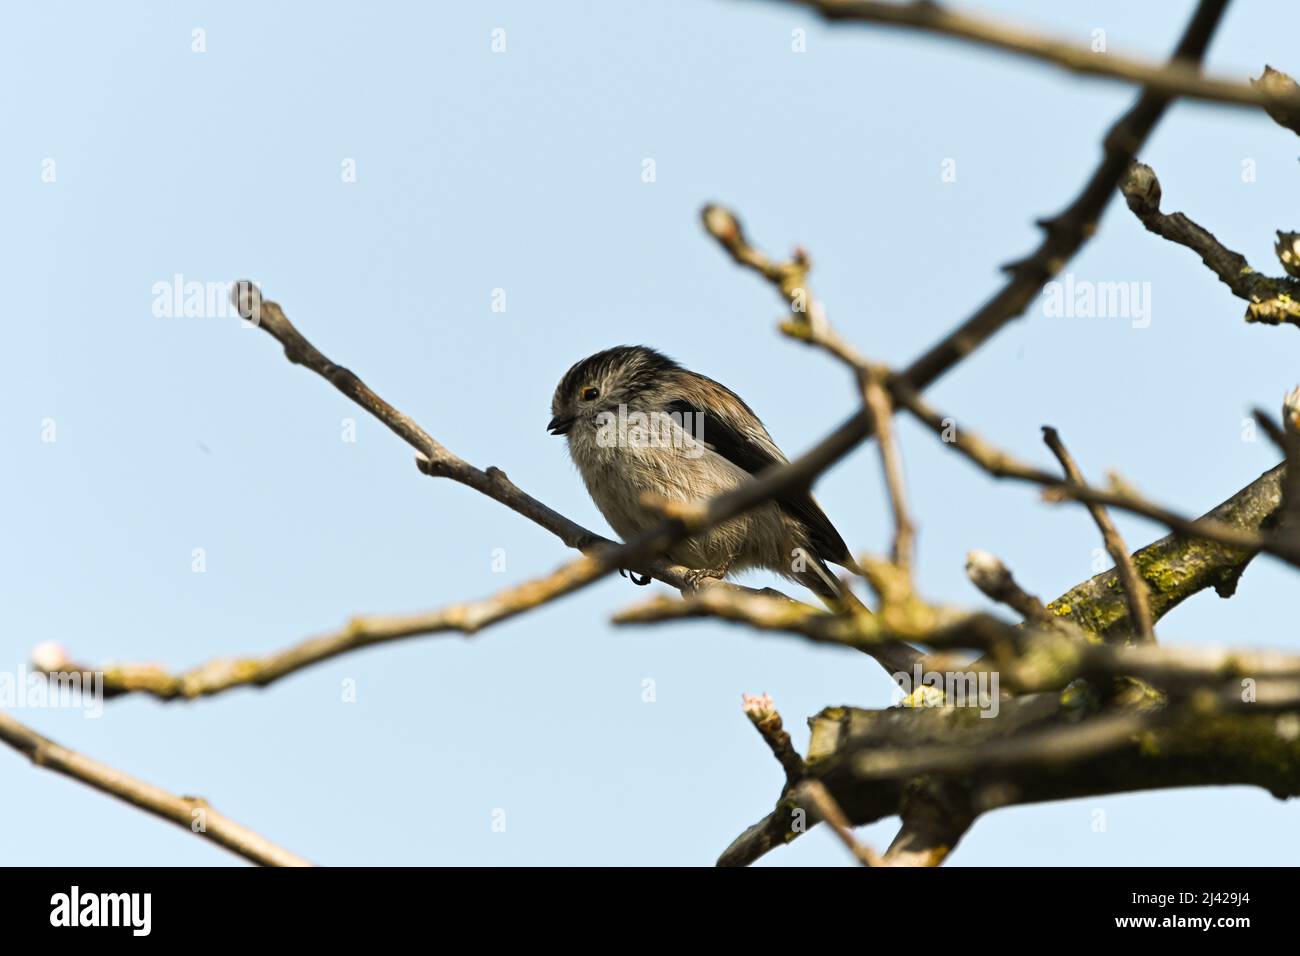 A Long-tailed Tit, Aegithalos caudatus, long-tailed bushtit sitting on a branch of an old apple tree, Malus domestica Stock Photo